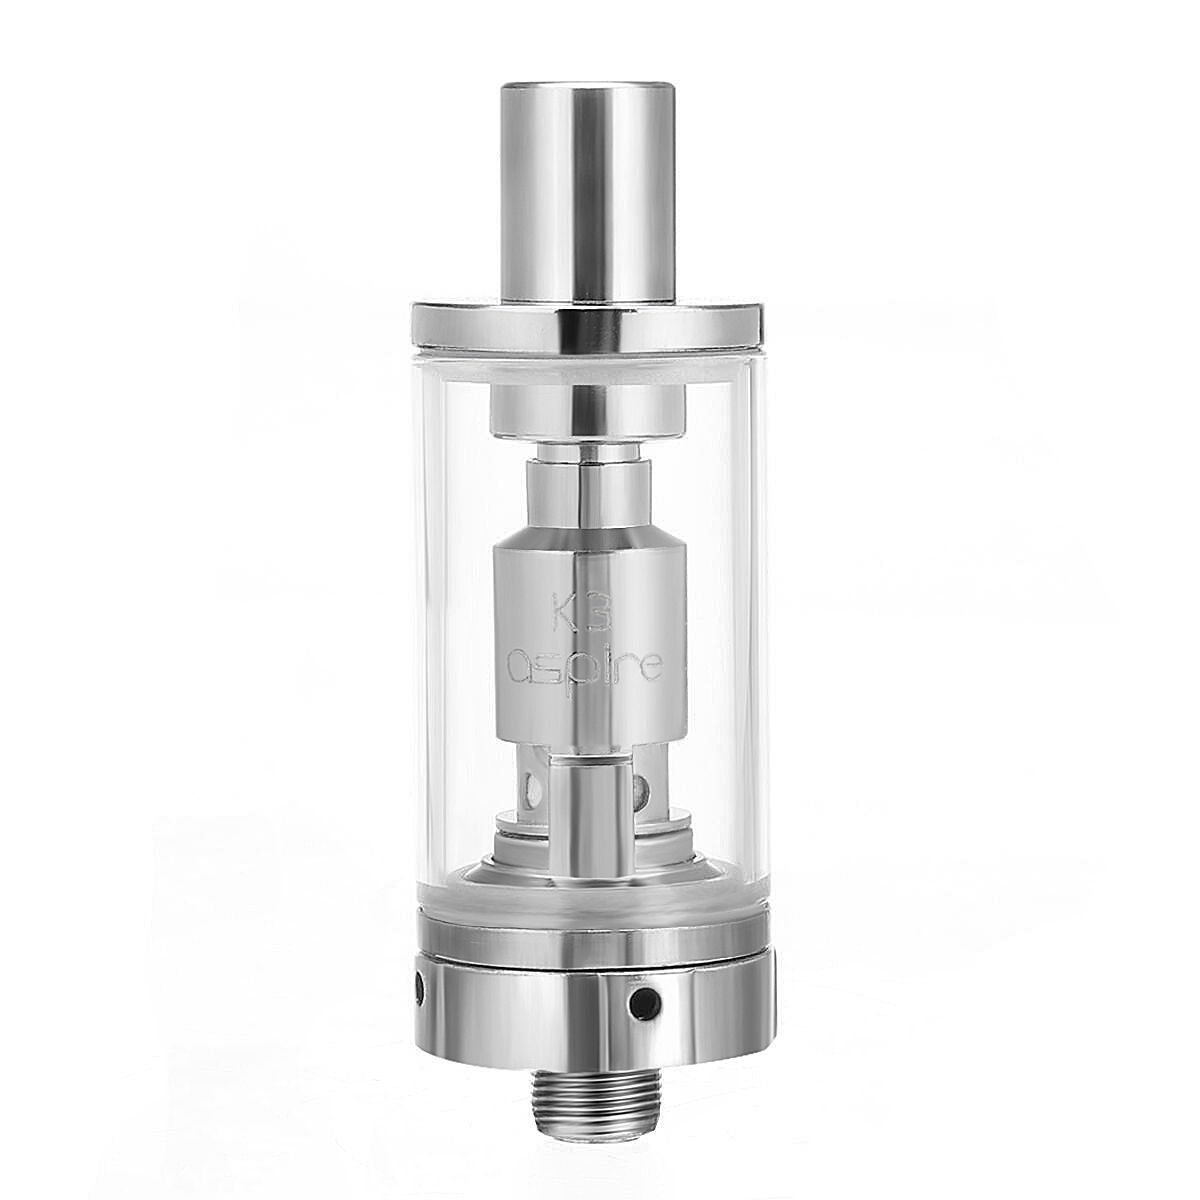 Aspire-K3-Clearomizer-Tank-2ml-TPD-Compliant-Coil-Removable-Atomizer-510-Drip-Tip-1271030